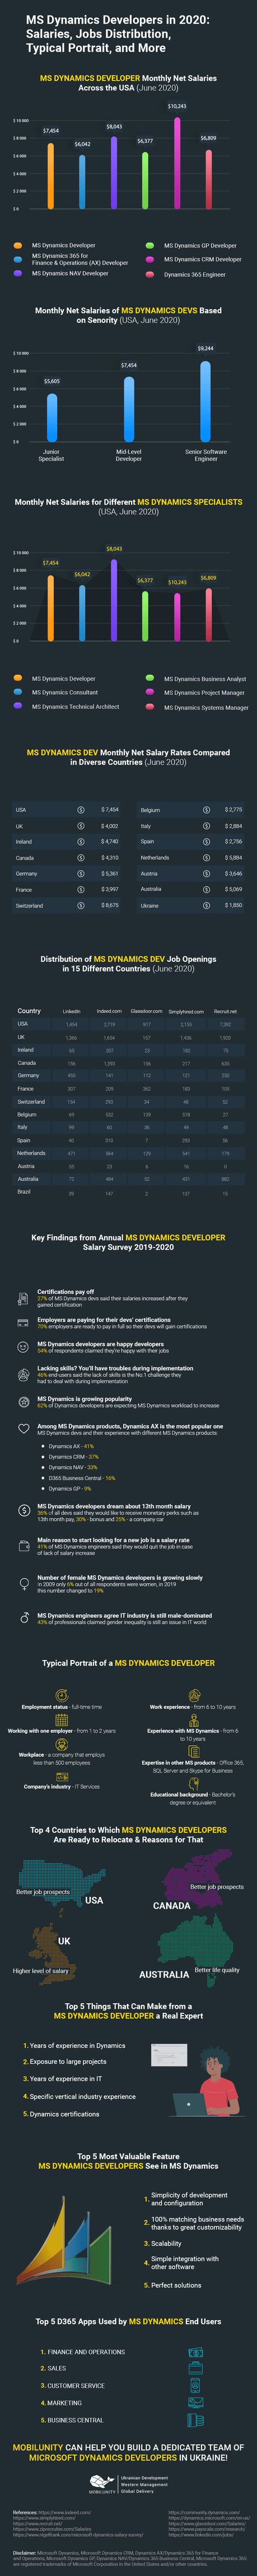 MS Dynamics Developers 2020: Stats on Salaries, Jobs and More